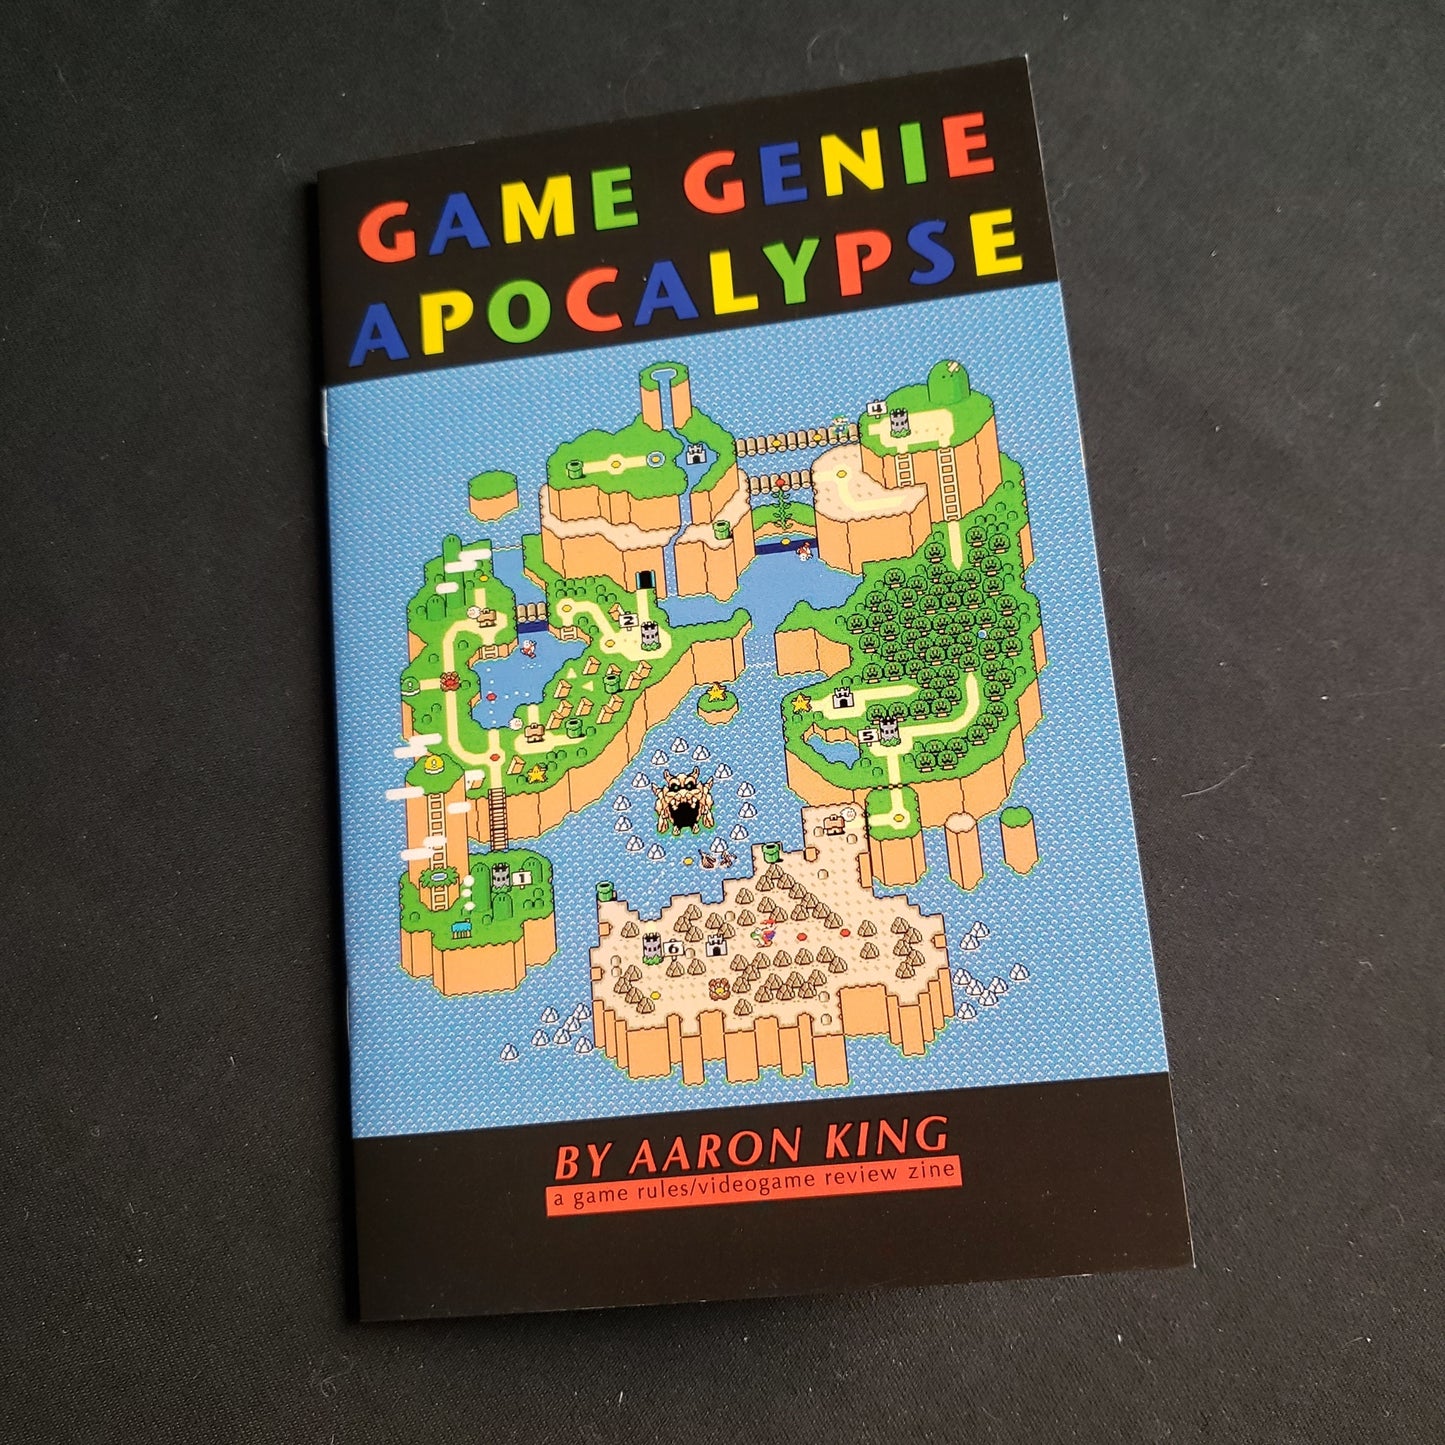 Image shows the front cover of the Game Genie Apocalypse roleplaying game book